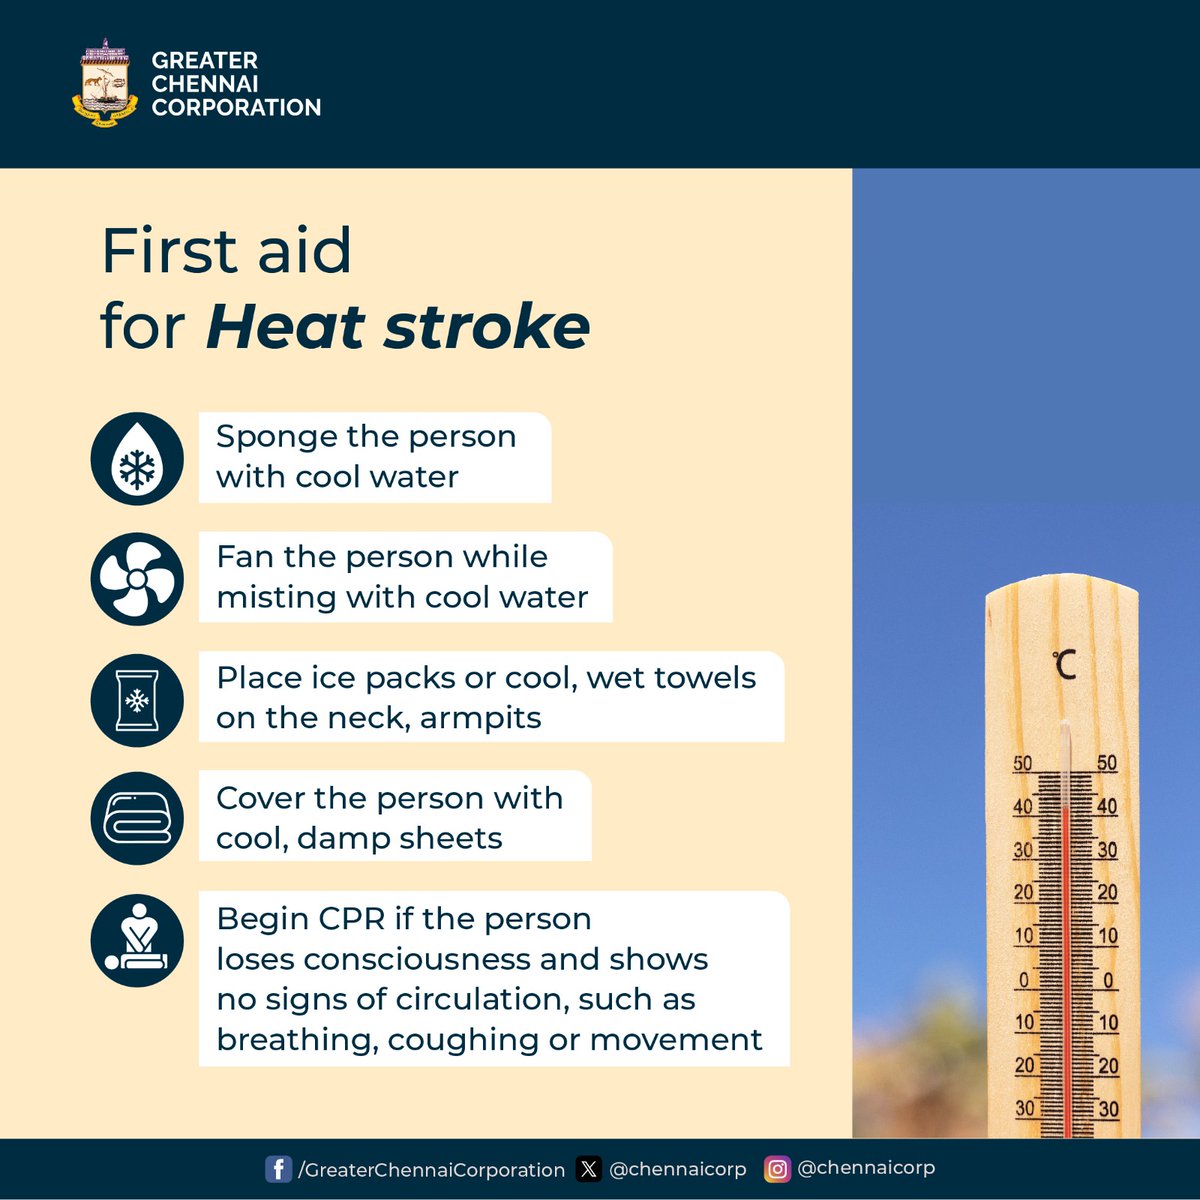 Dear #Chennaiites,
Ensure you're familiar with the initial steps for dealing with heat stroke. Stay vigilant and respond promptly when necessary.

#ChennaiCorporation
#HeretoServe